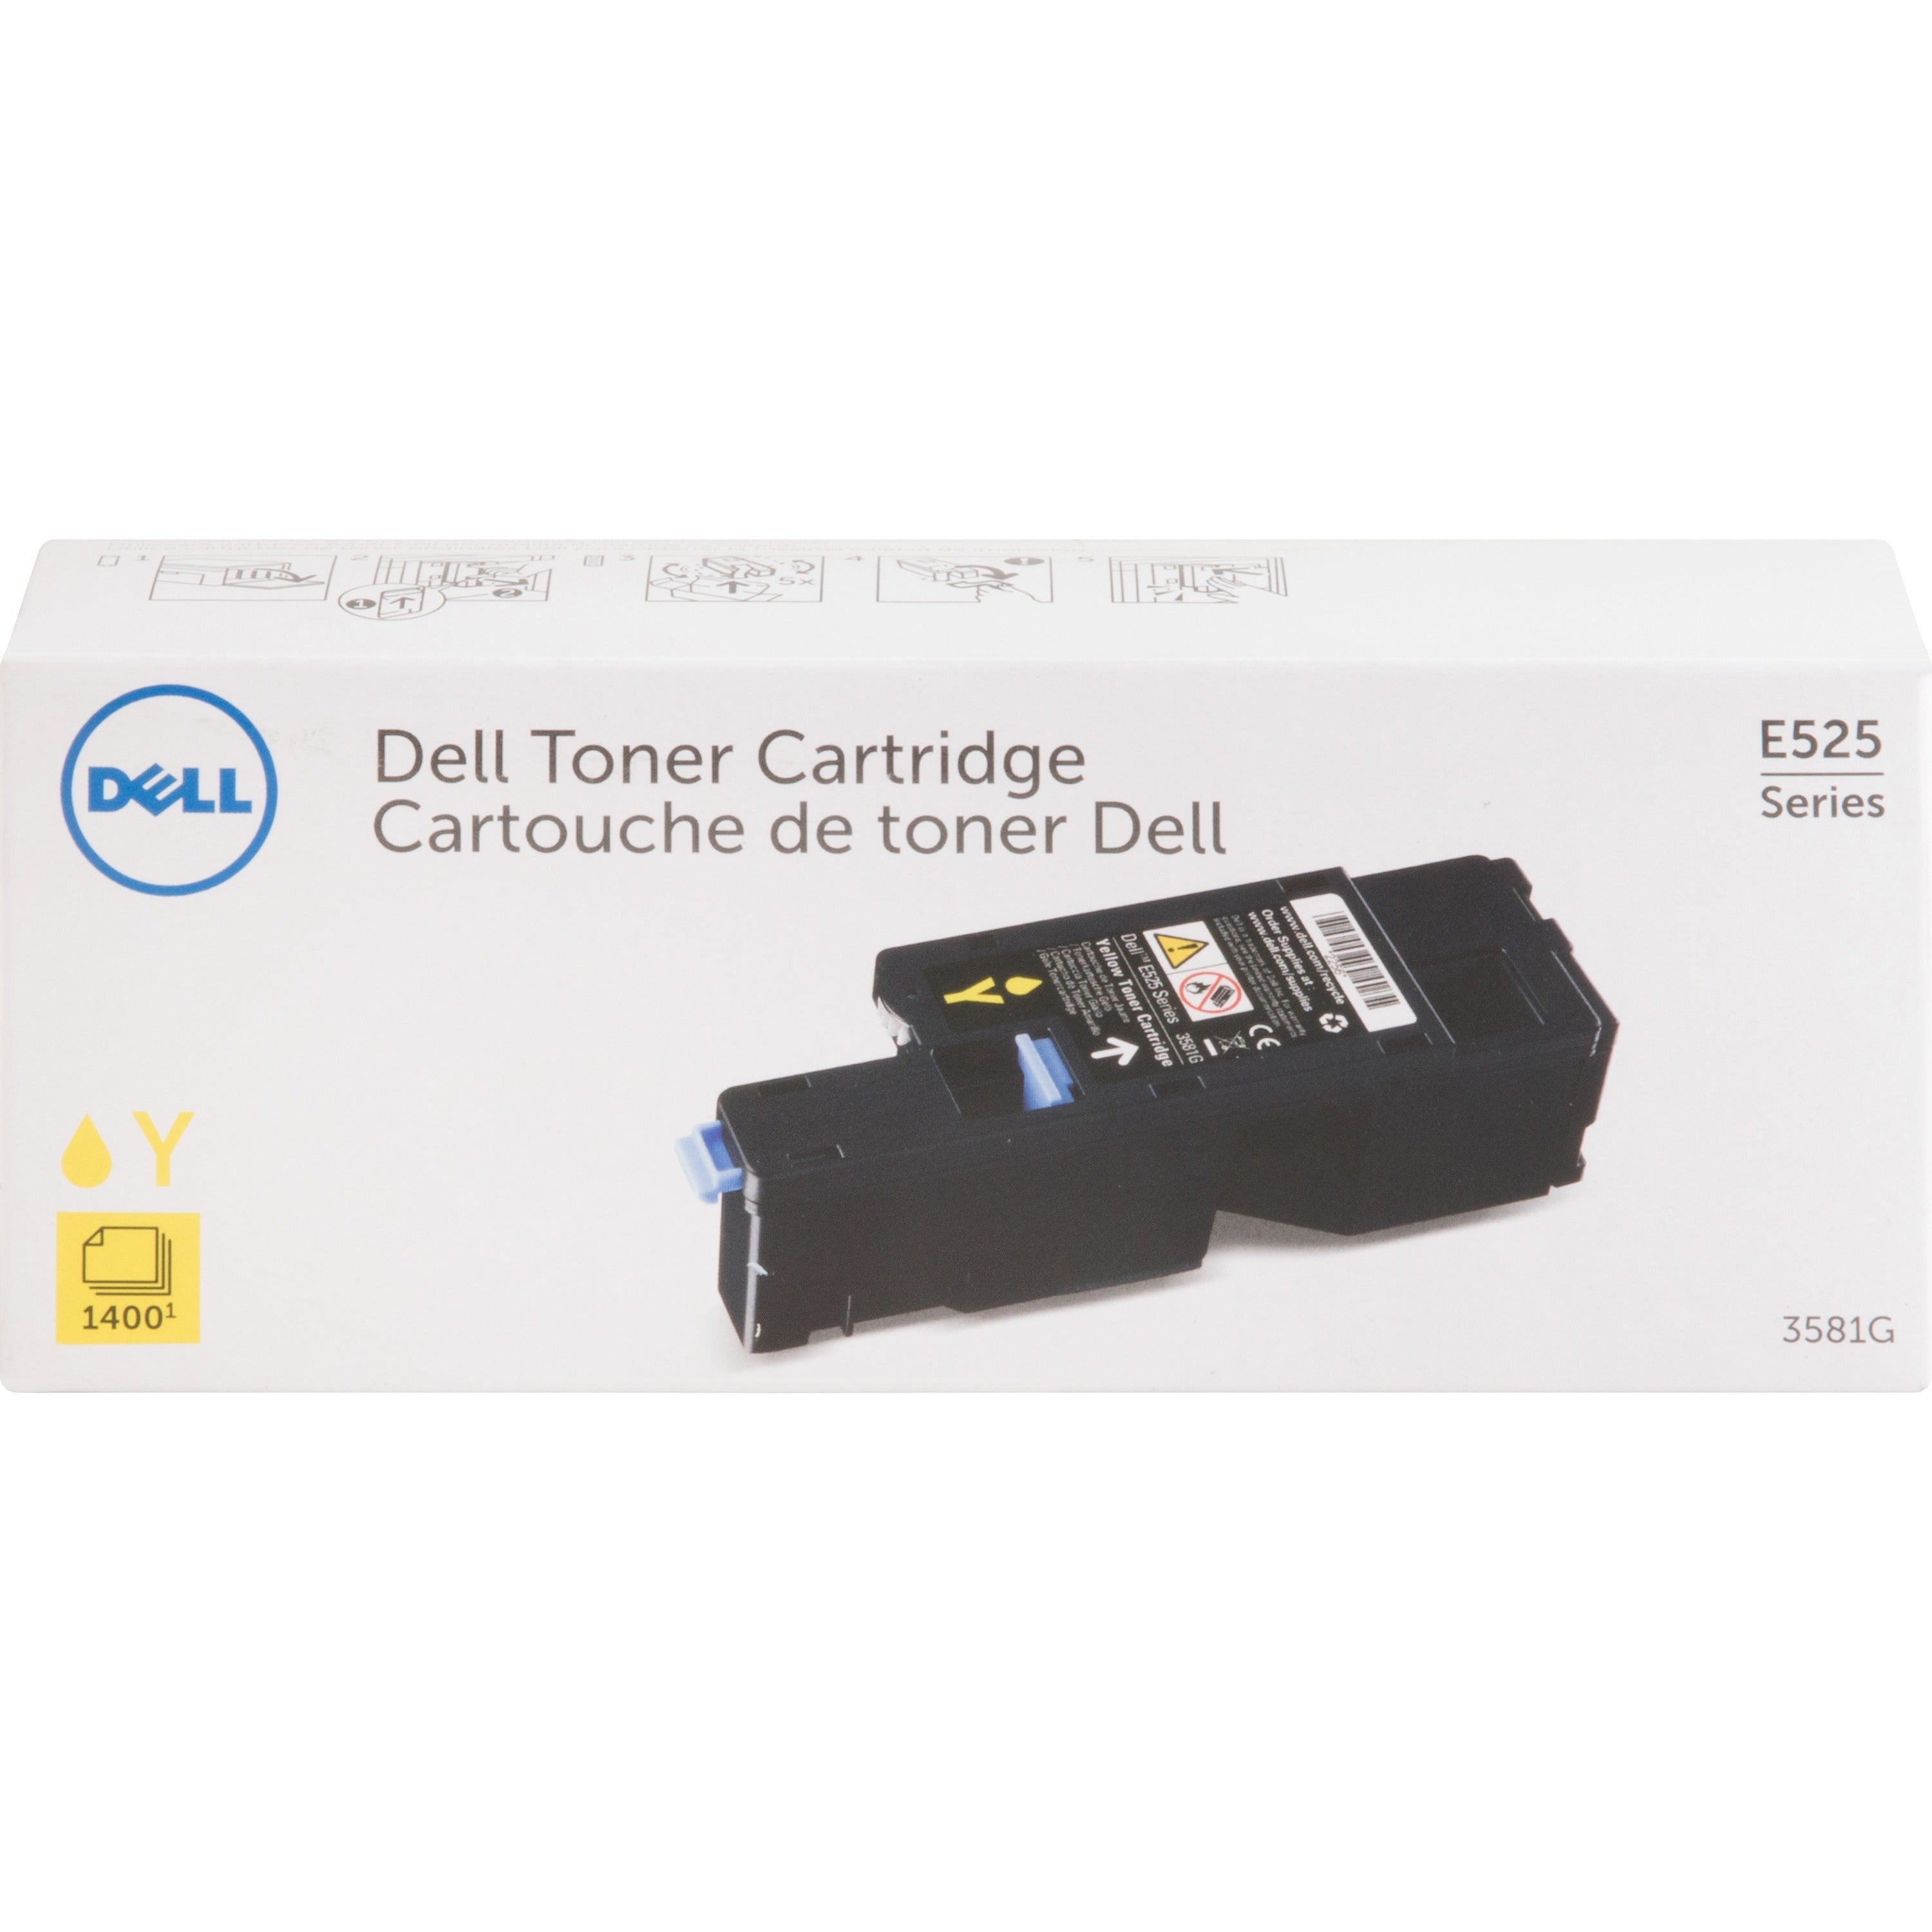 dell-original-laser-toner-cartridge-yellow-1-each-1400-pages_dll3581g - 1